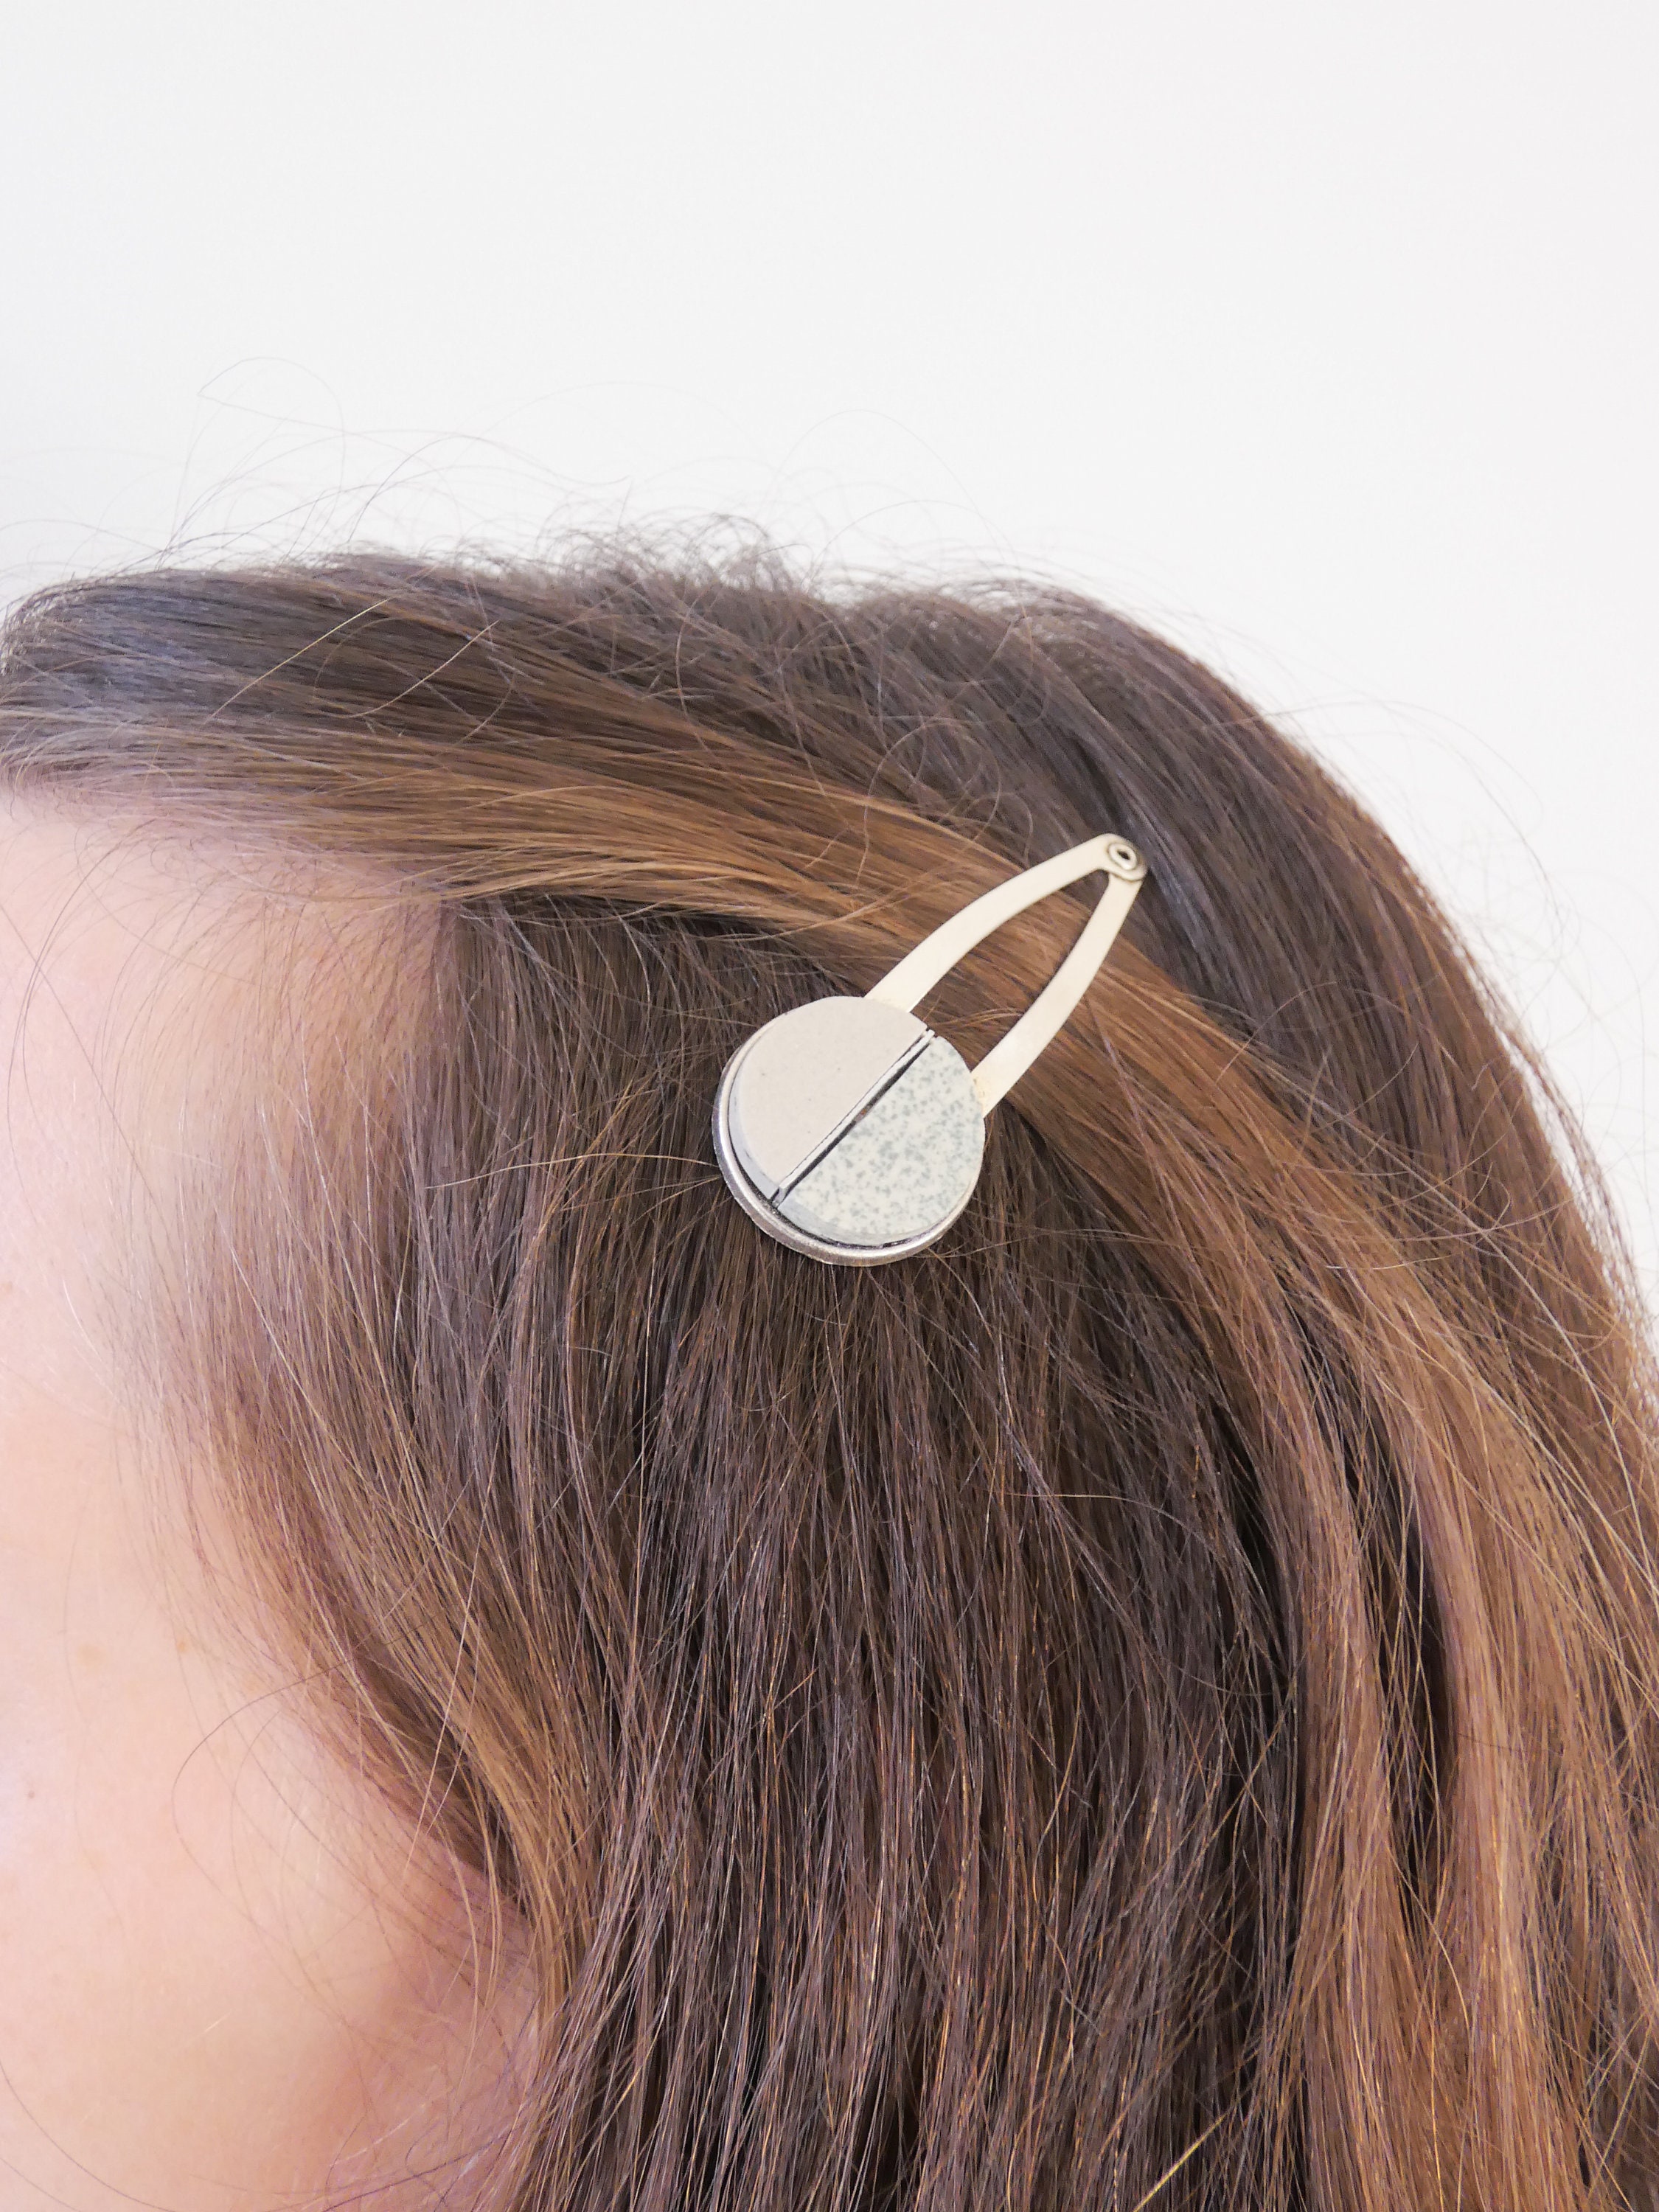 Brass or Sterling Silver Saturn Hair Slide Two Piece Hair Holder